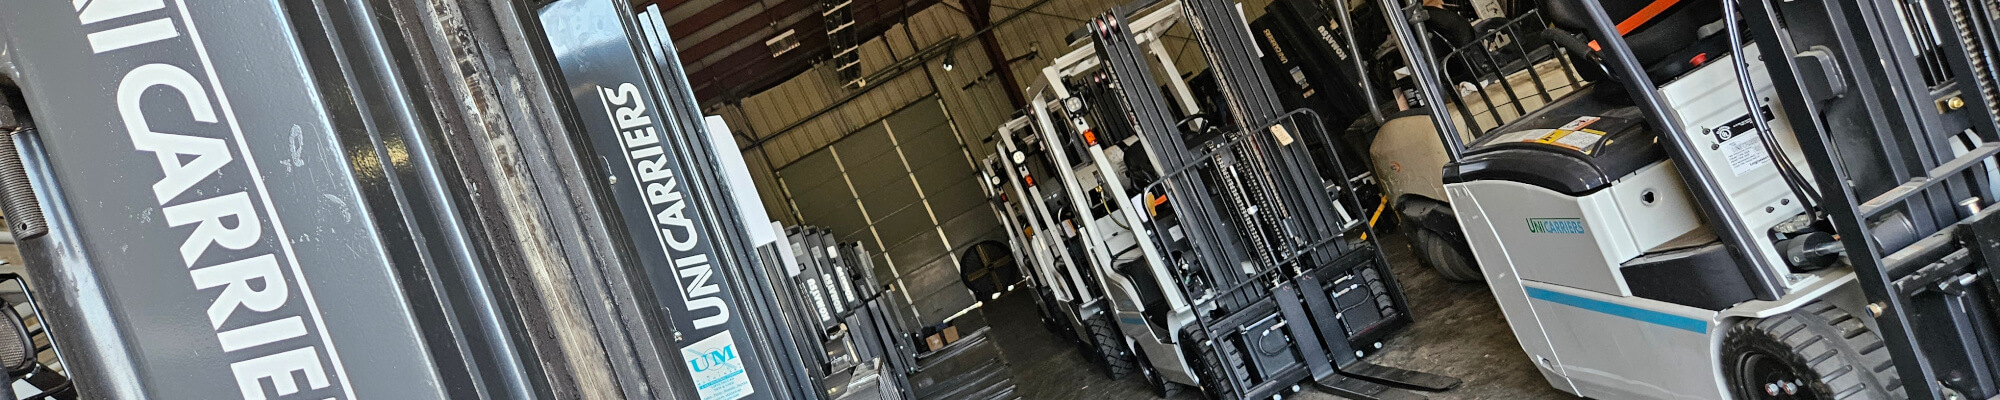 Unicarriers Forklifts